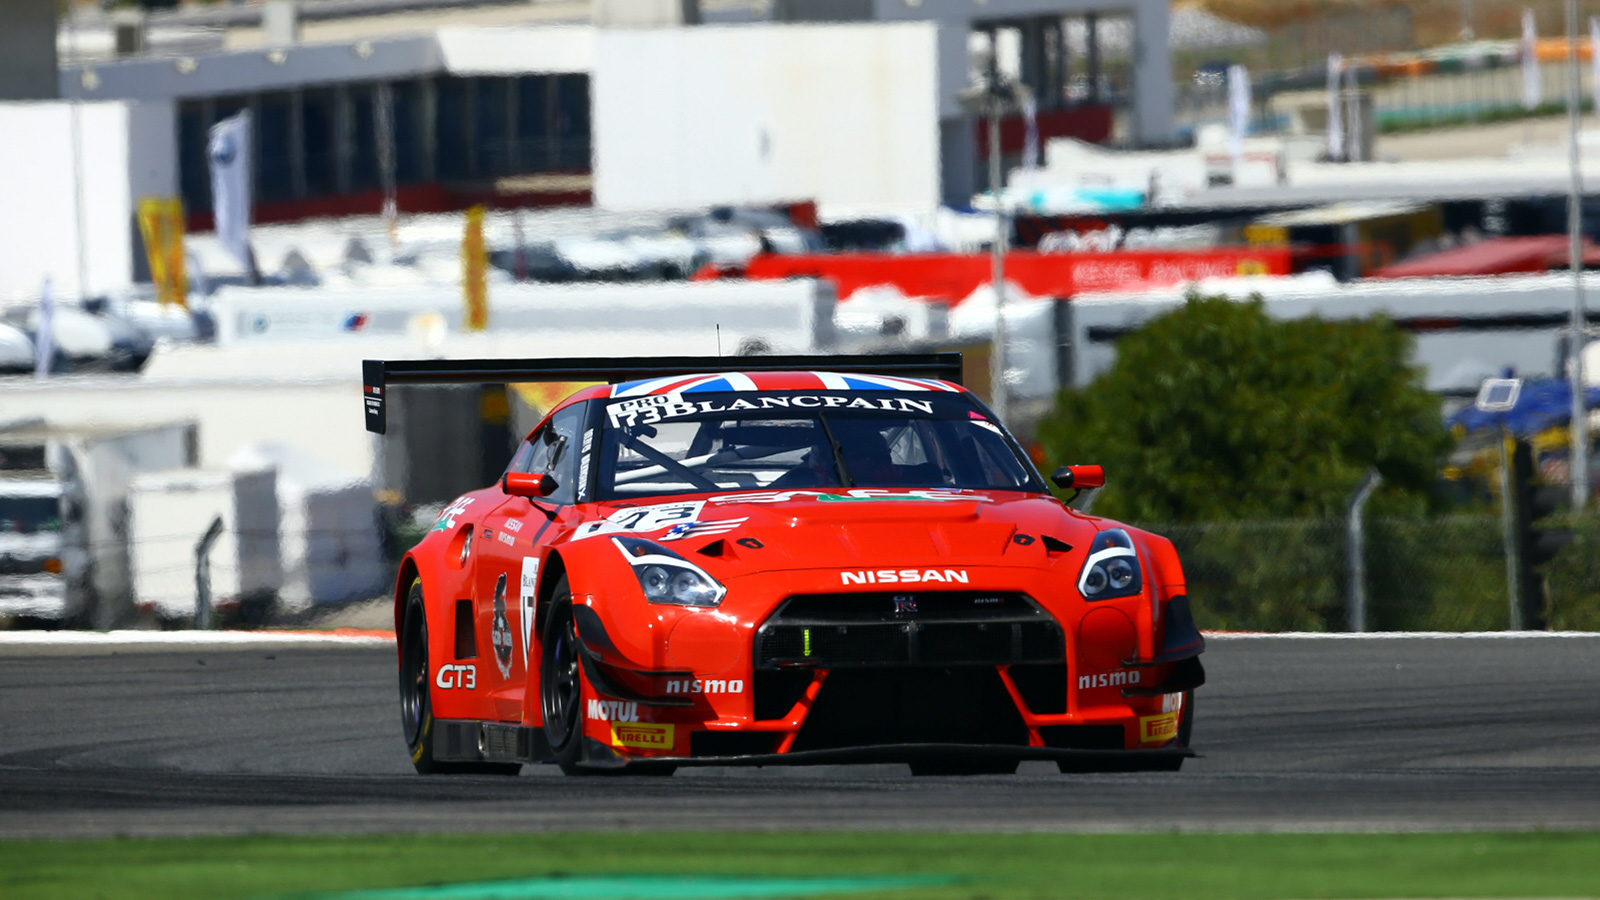 Round six of the Blancpain Sprint Series will take place over the weekend 3rd/4th October at Misano in Italy.